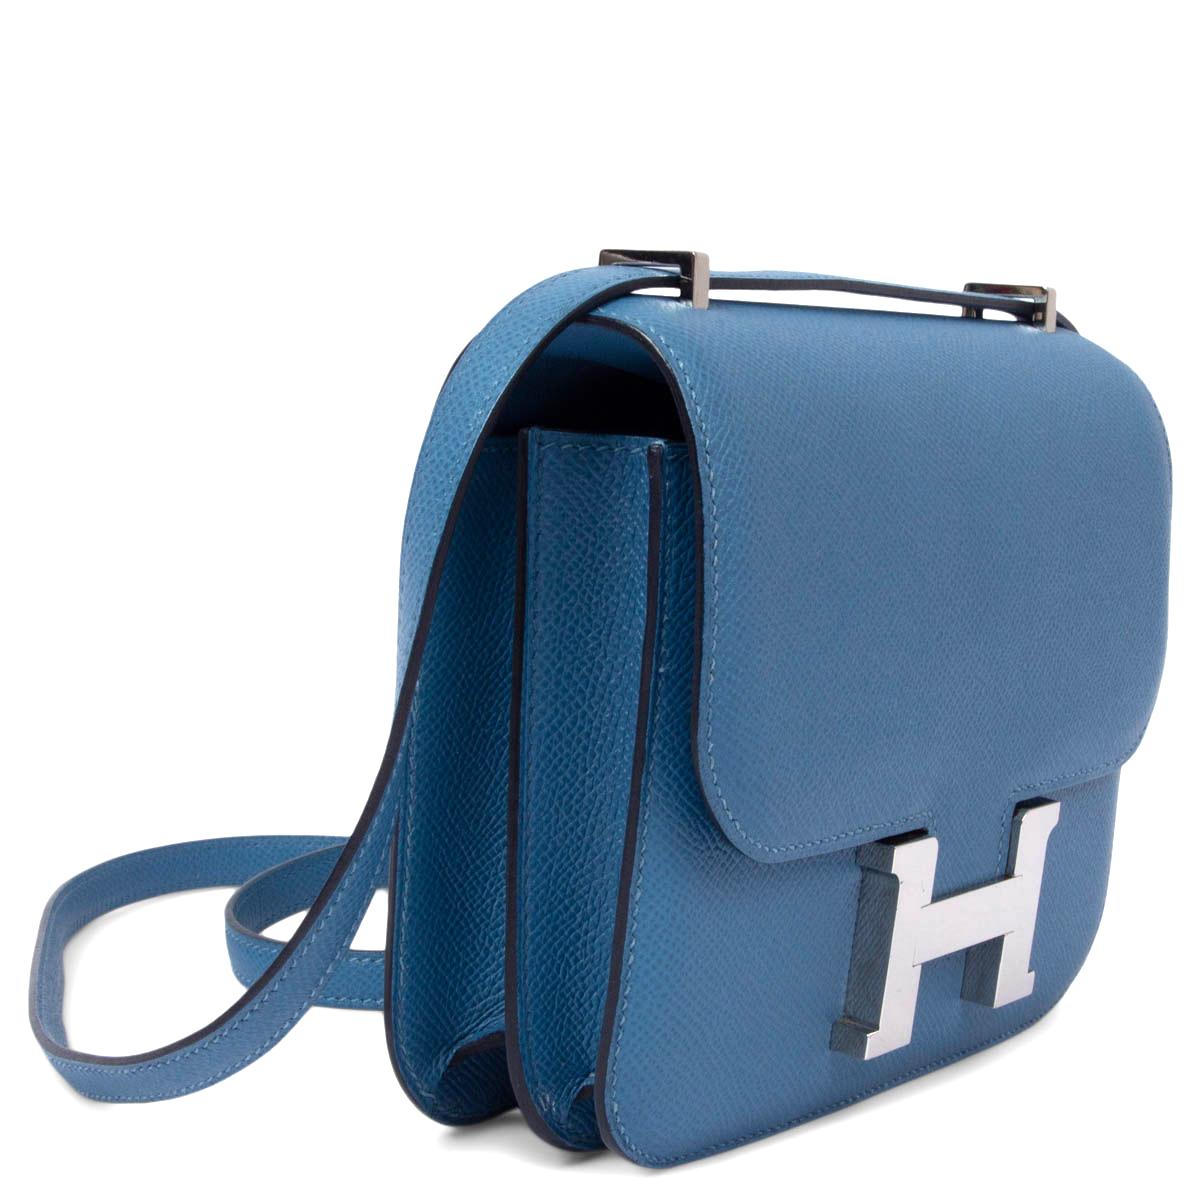 100% authentic Hermès Constance 18 mini shoulder bag in Bleu Azure Veau Epsom leather. Palladium H buckle closure. Lined with Veau Swift leather. The interior is divided into two compartments, with an open pocket on the front and back. Has been worn